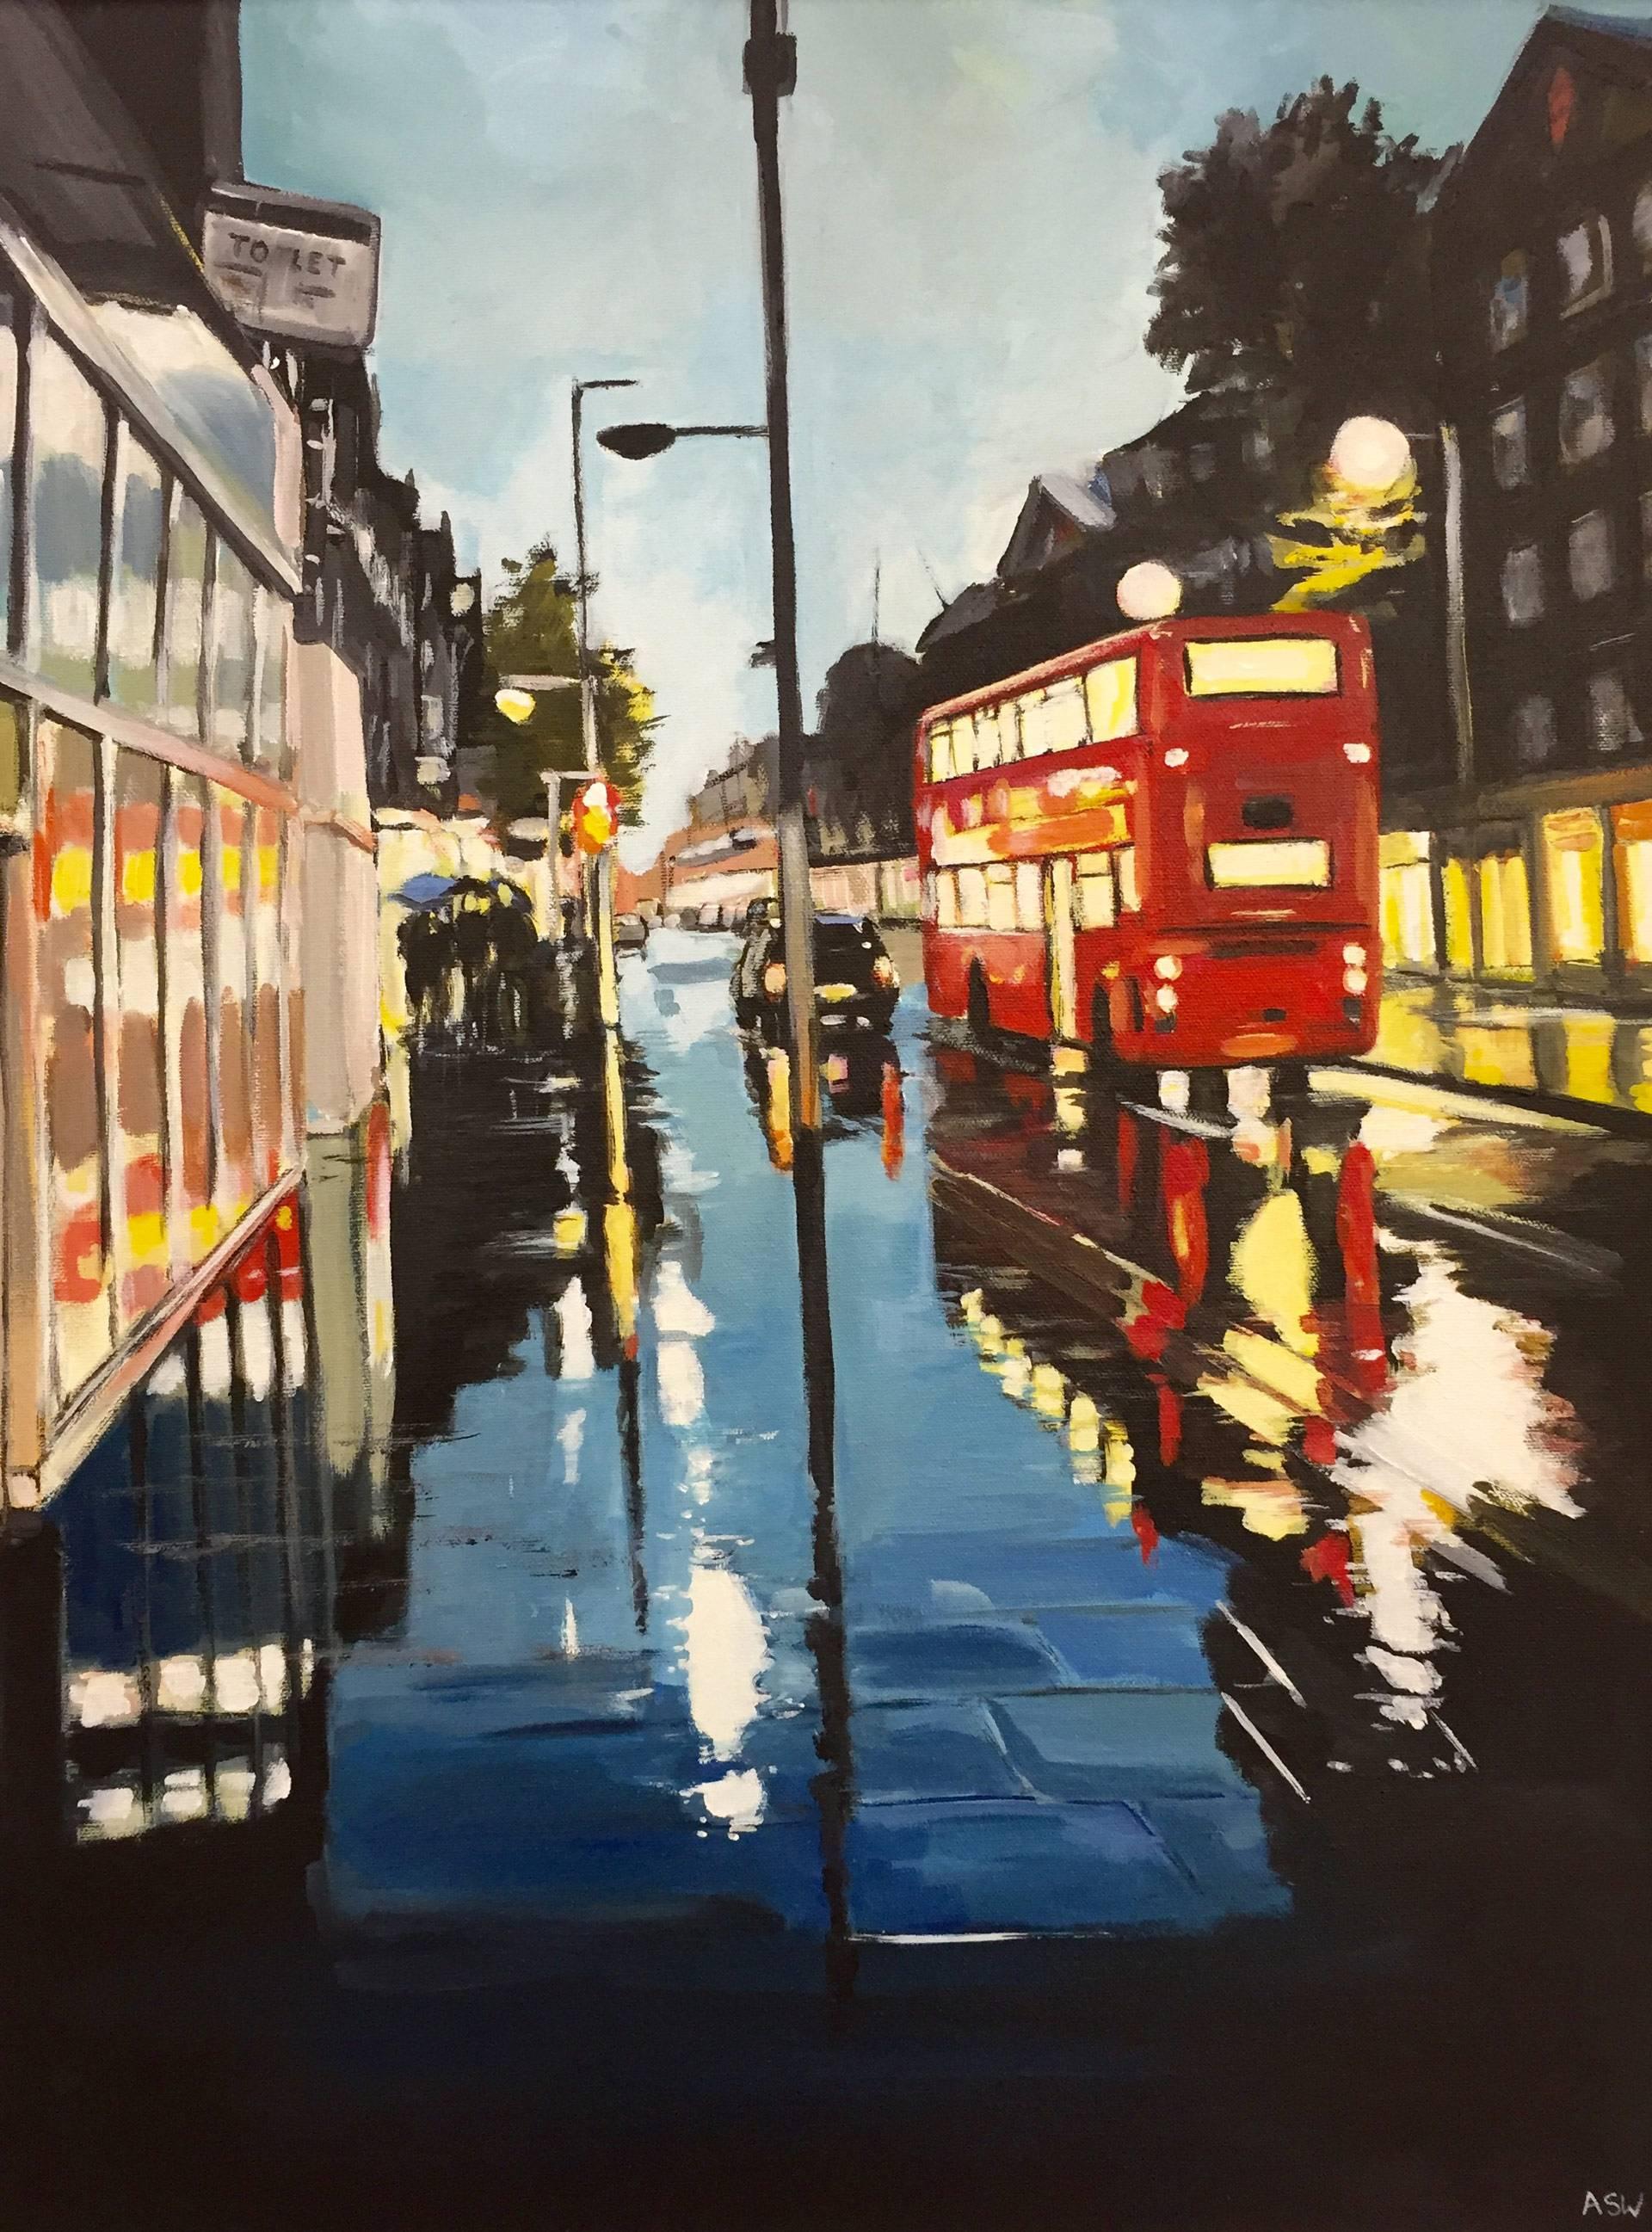 Angela Wakefield Landscape Painting - London Bus in the Rain - Cityscape by Leading British Urban Landscape Artist